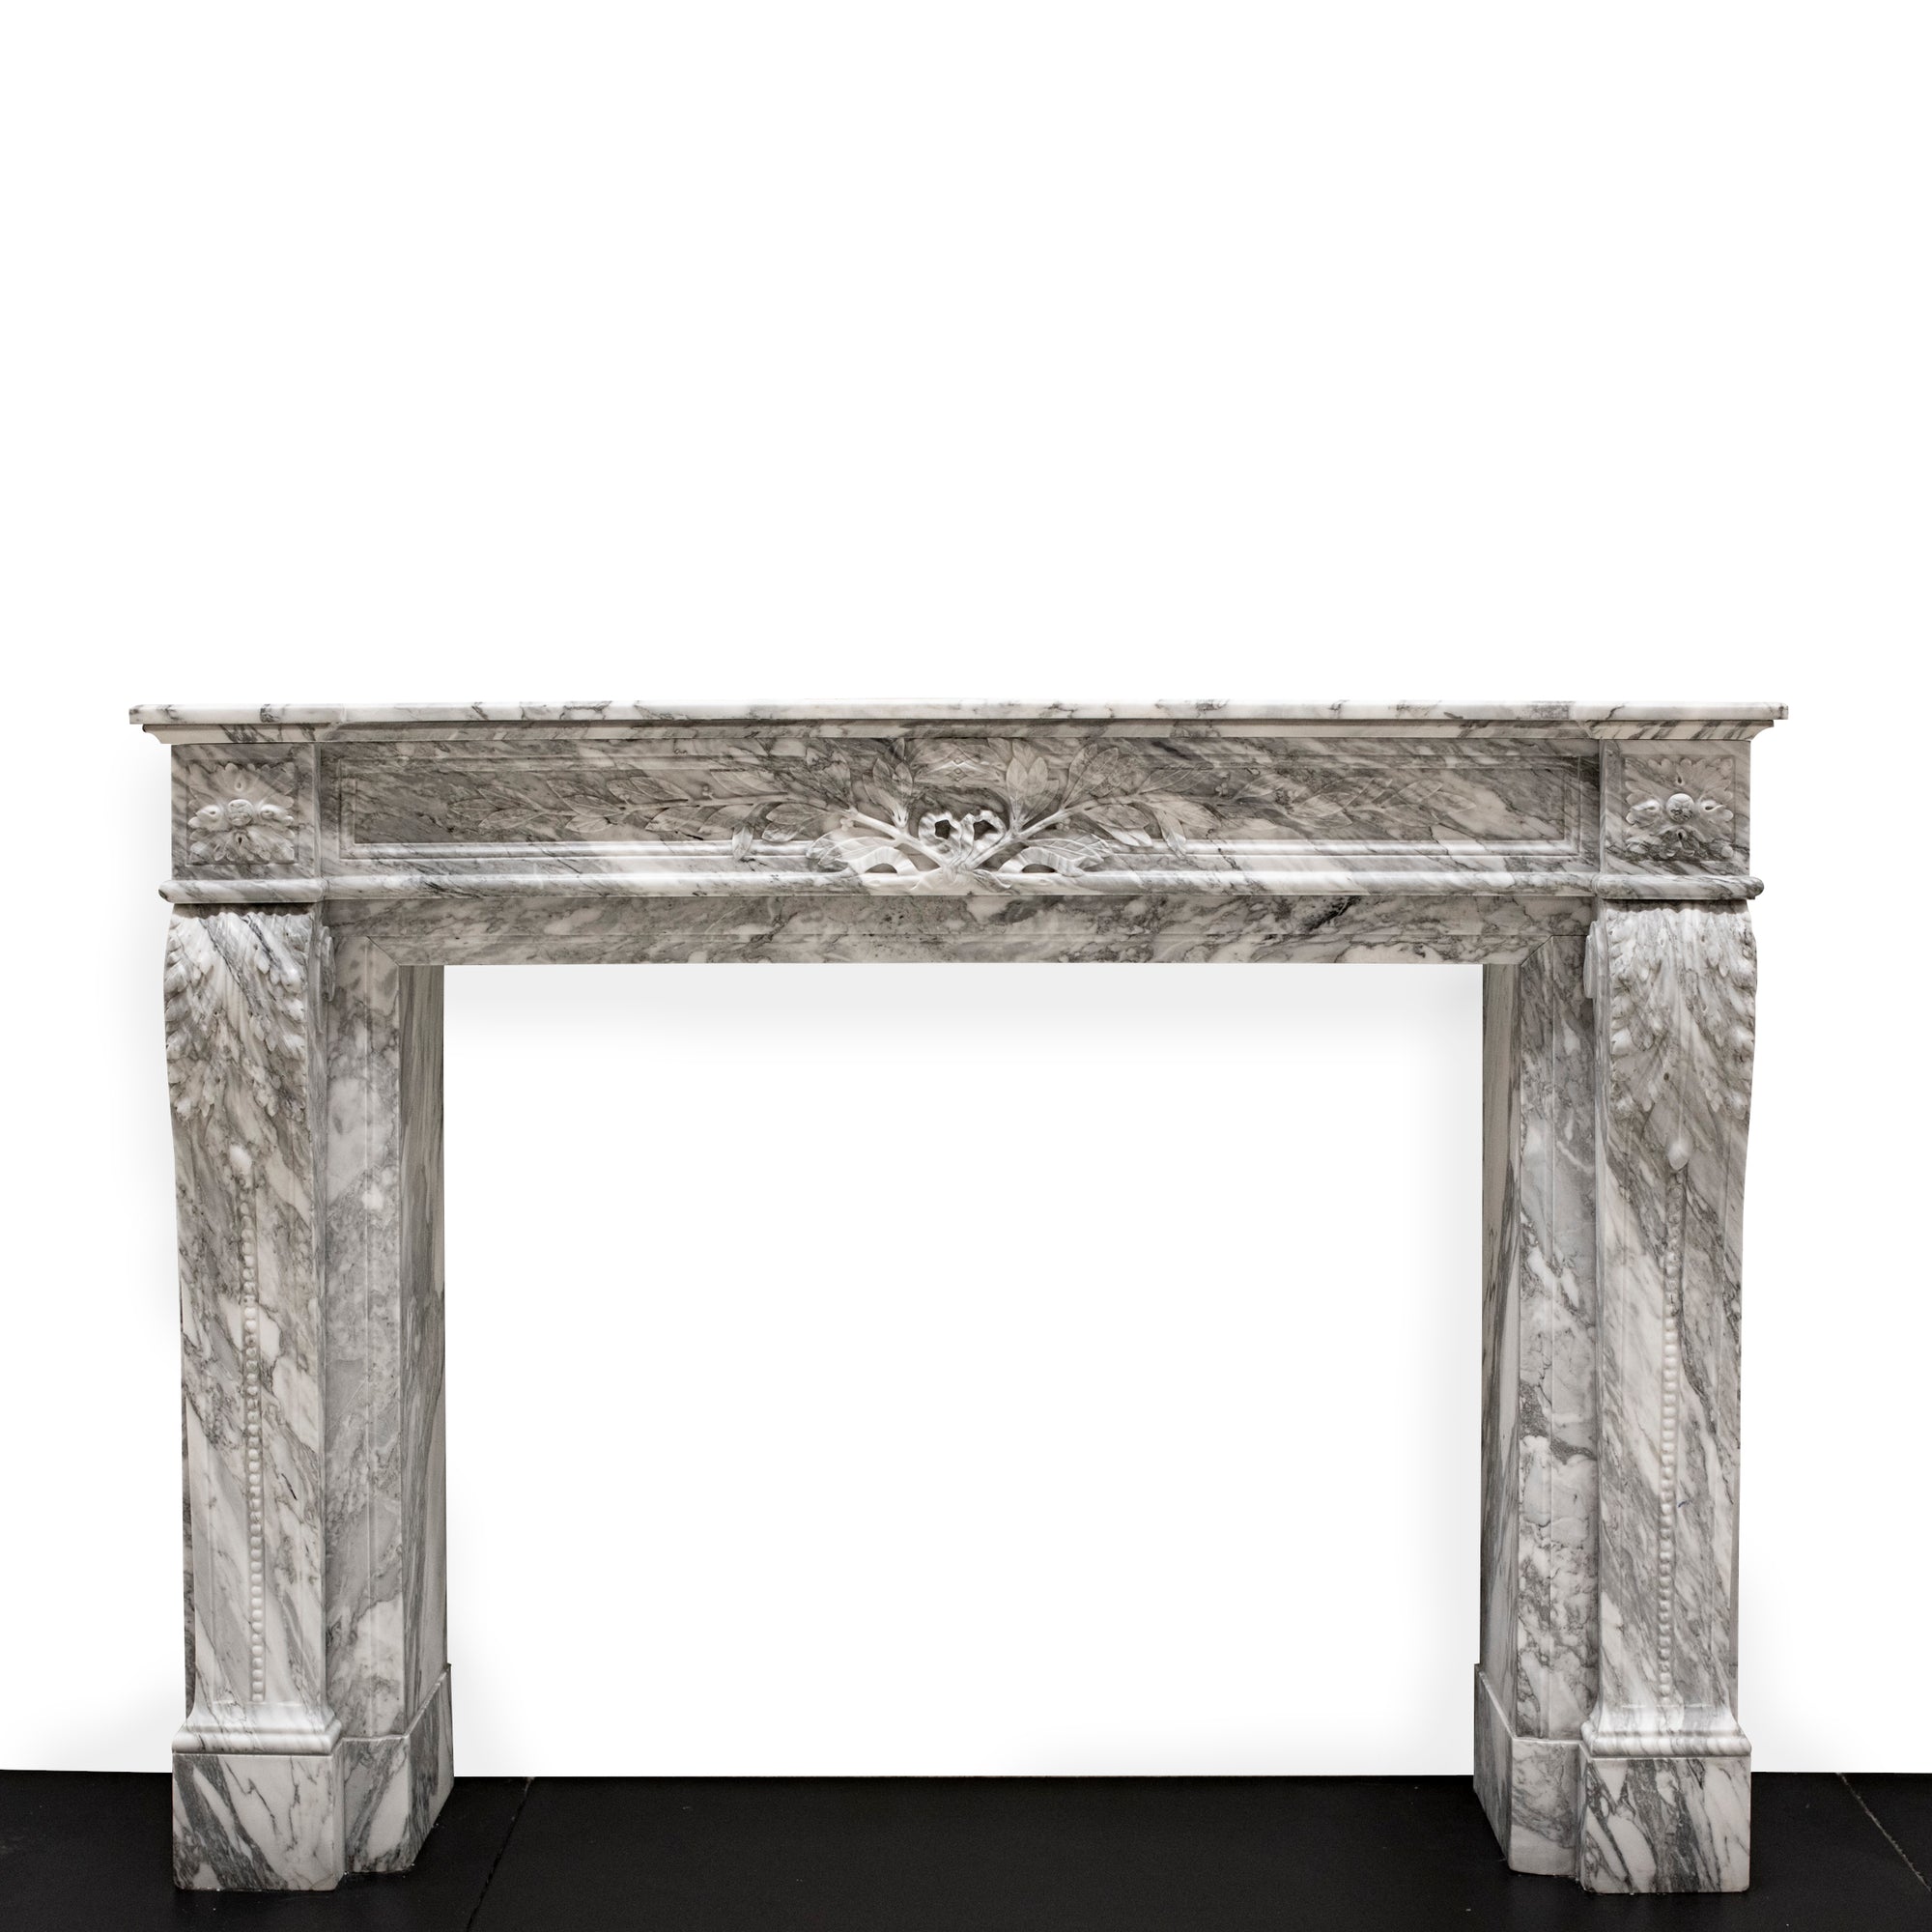 Antique Louis XVI Style Italian Marble Fireplace in Arabescato Marble | The Architectural Forum